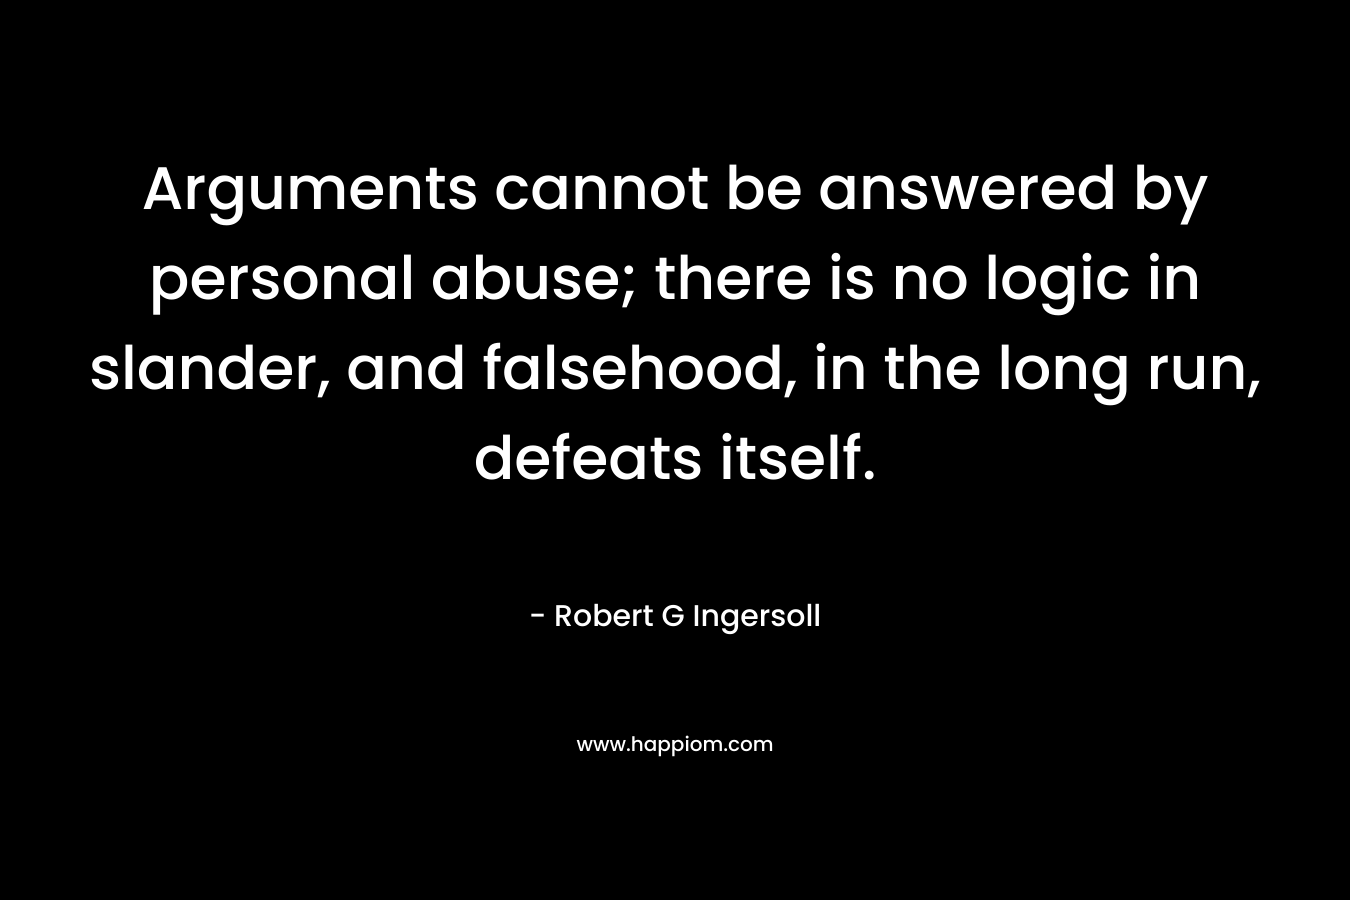 Arguments cannot be answered by personal abuse; there is no logic in slander, and falsehood, in the long run, defeats itself.